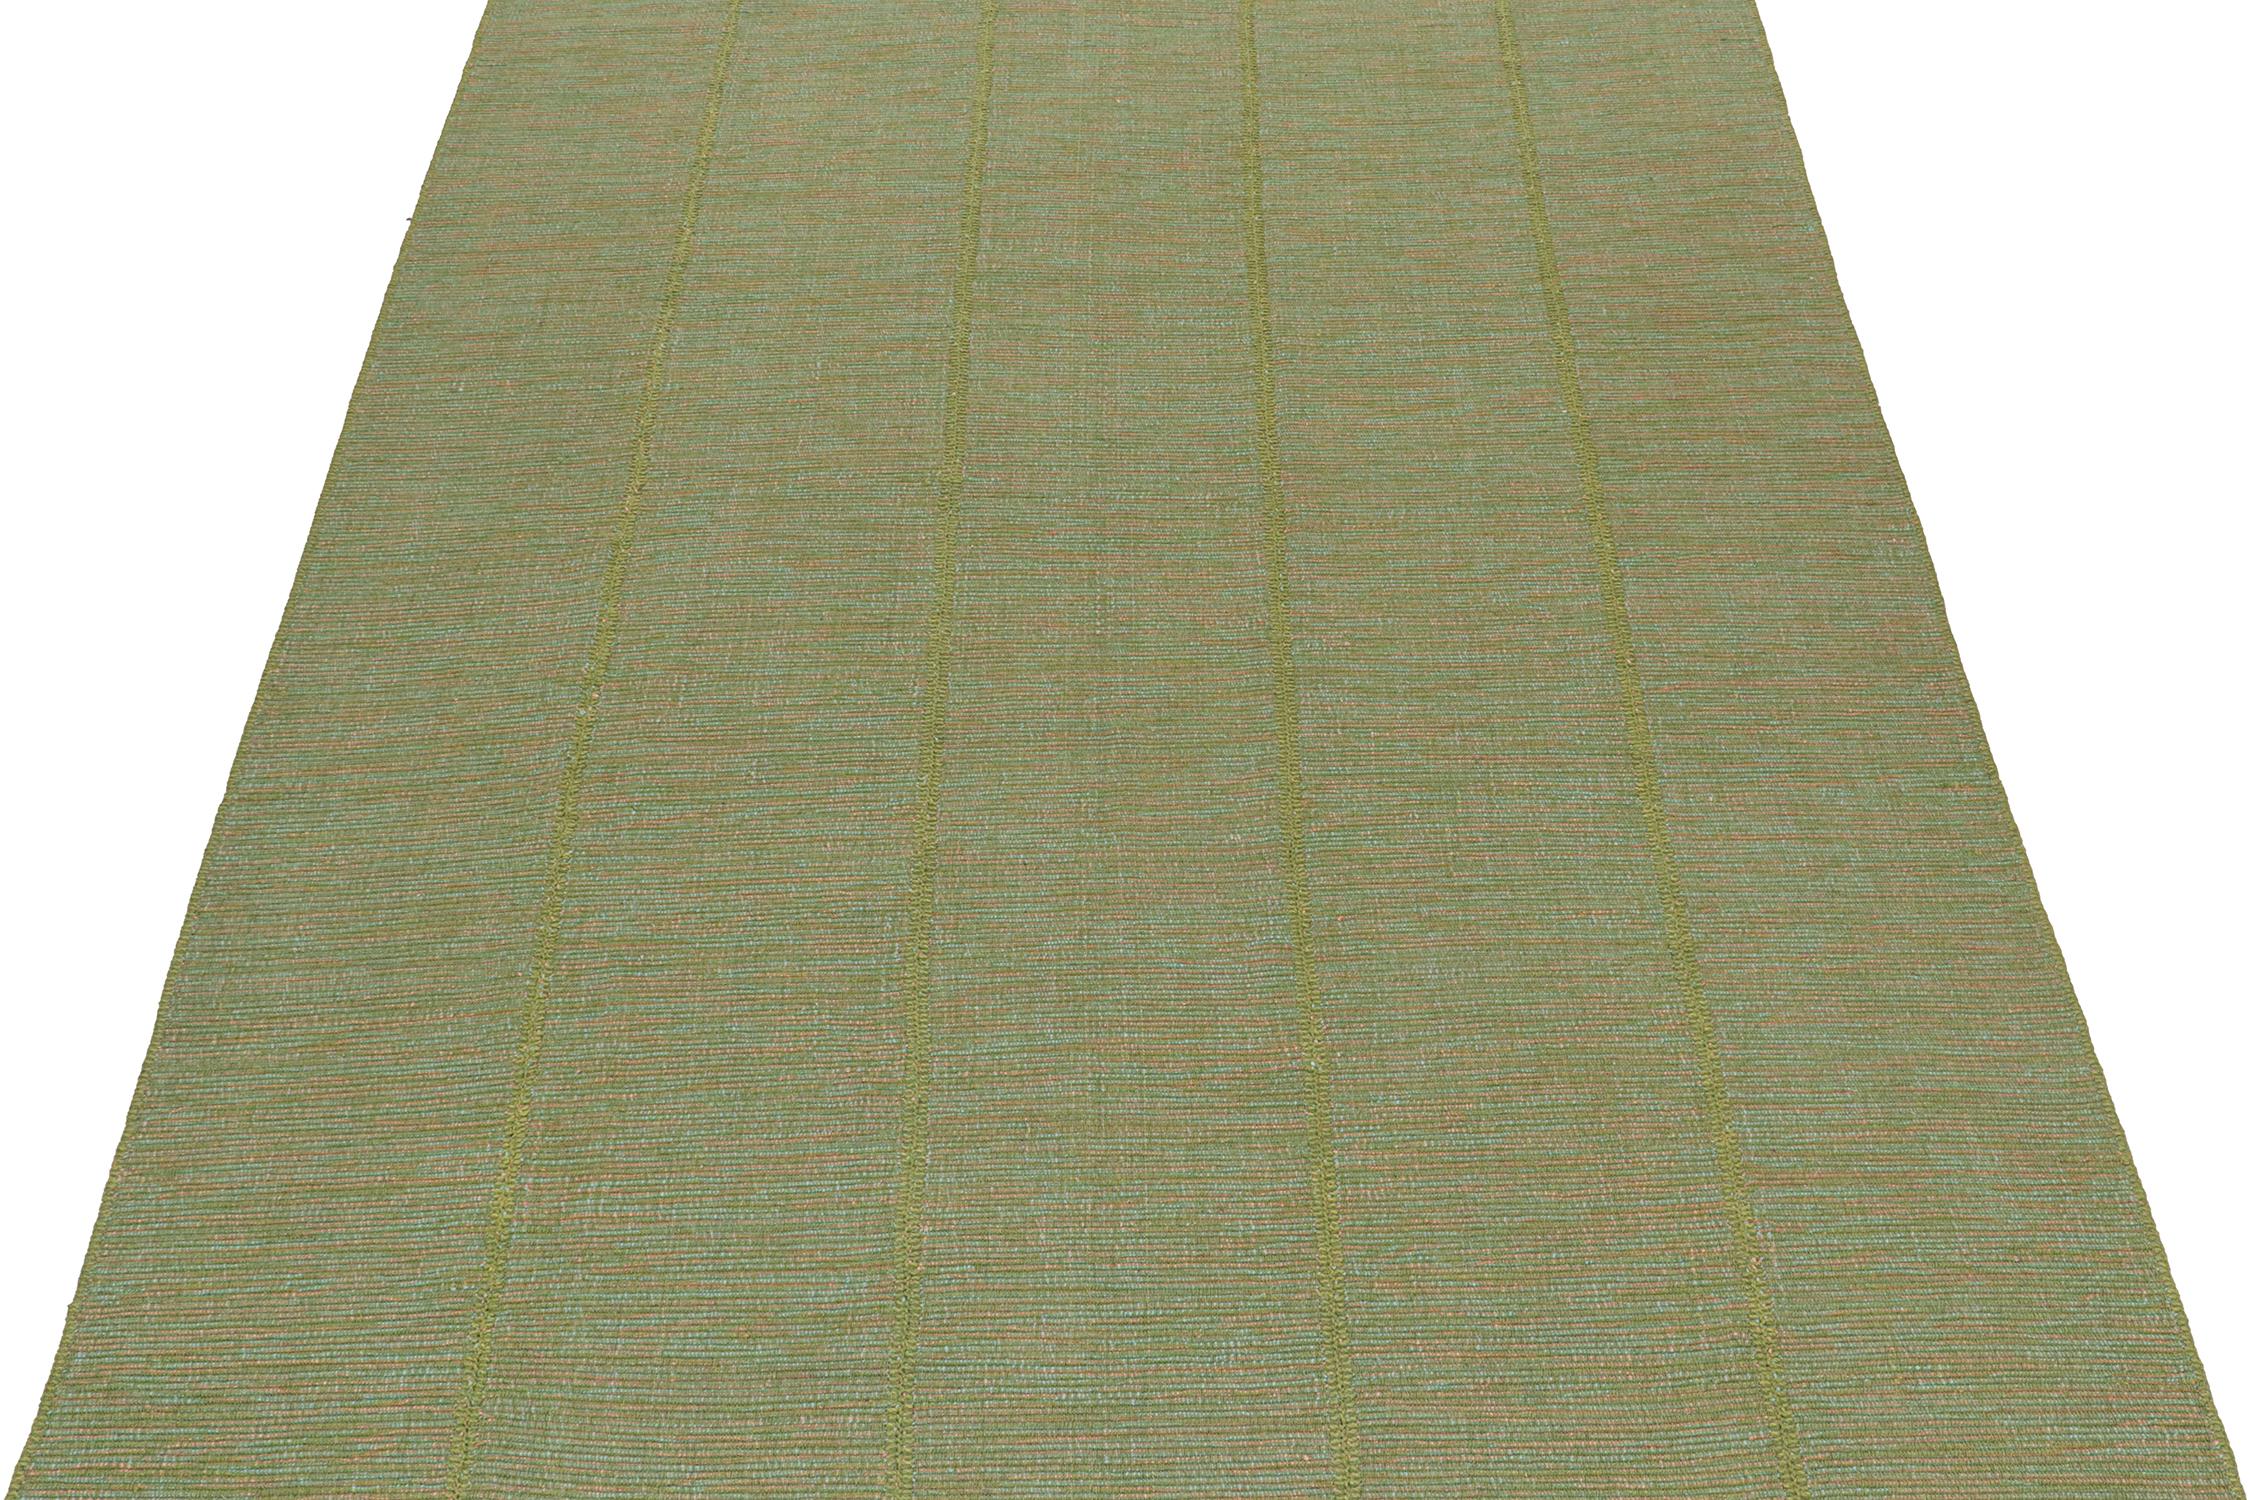 Handwoven in wool, this 9x12 Kilim is from a bold new line of contemporary flatweaves by Rug & Kilim.

Further On the Design:

The “Rez Kilim” connotes a modern take on Classic panel weaving. This edition enjoys chartreuse green with teal and pink